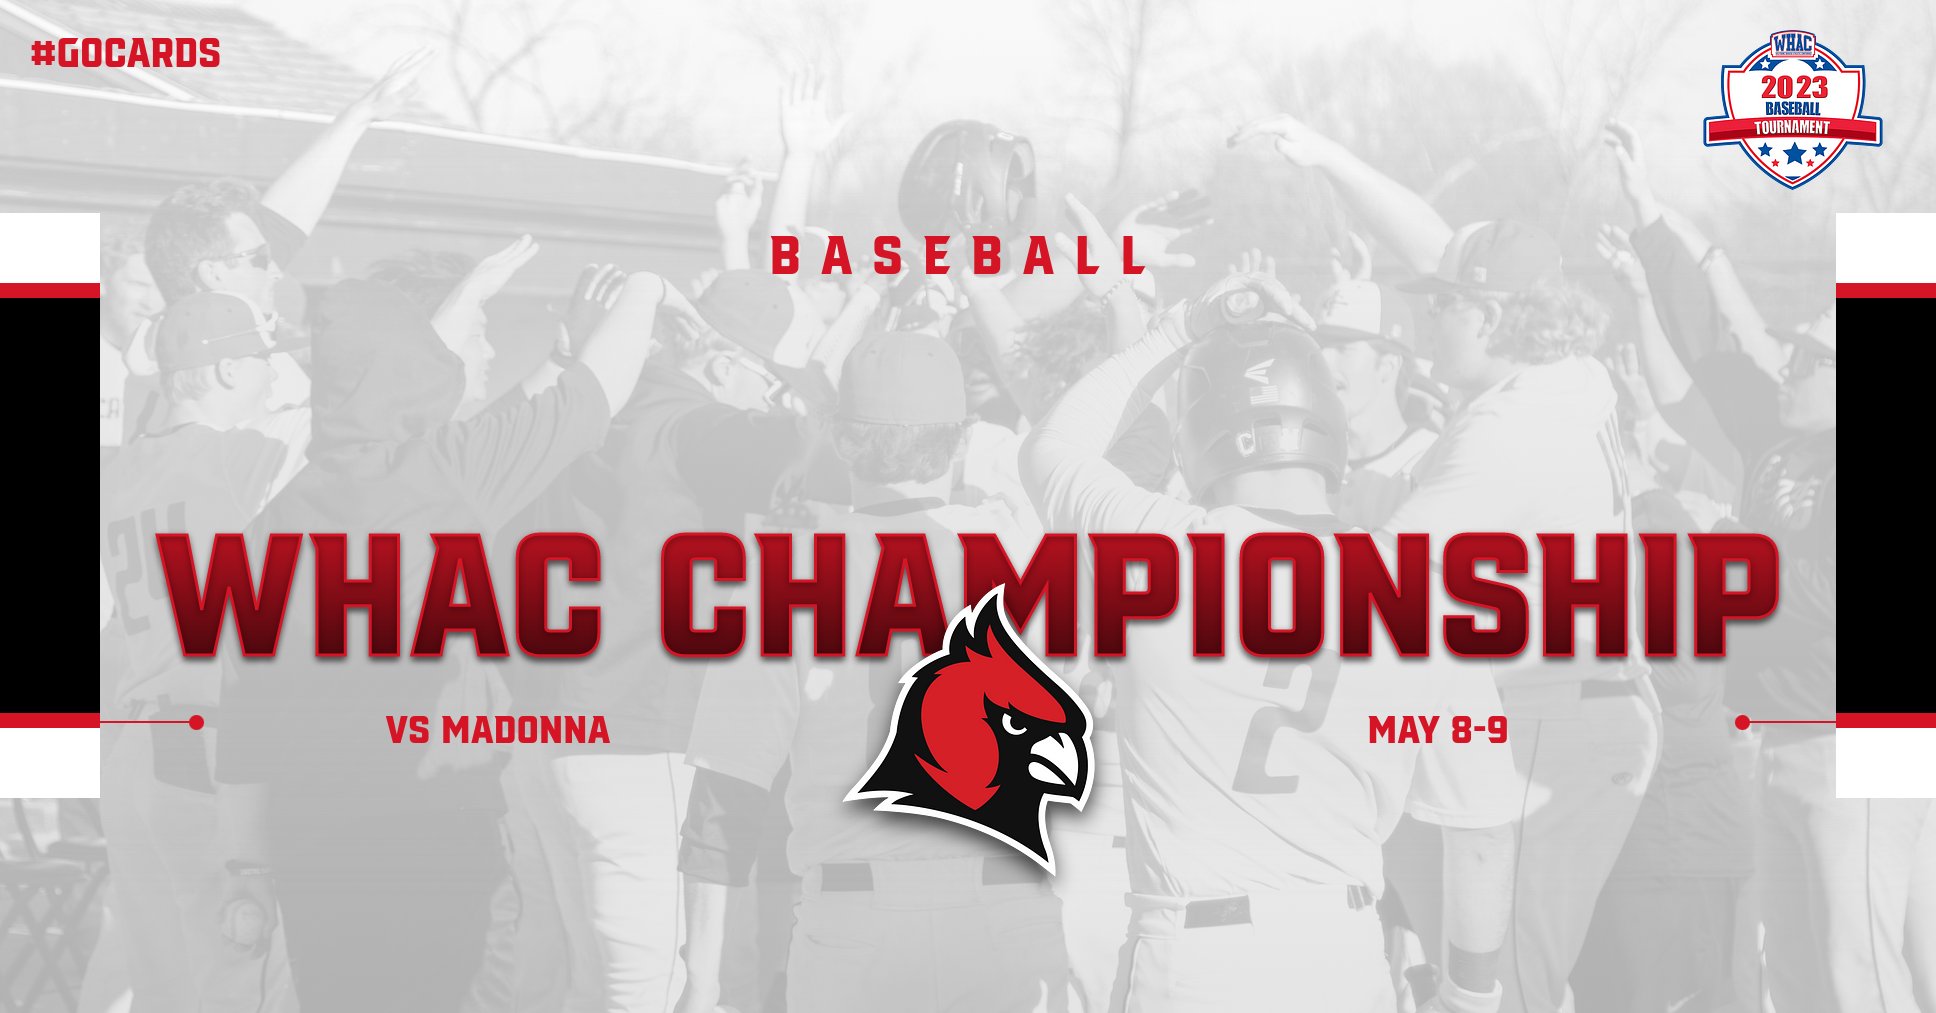 WHAC CHAMPIONSHIP PREVIEW: Baseball prepares to host Madonna in conference title series